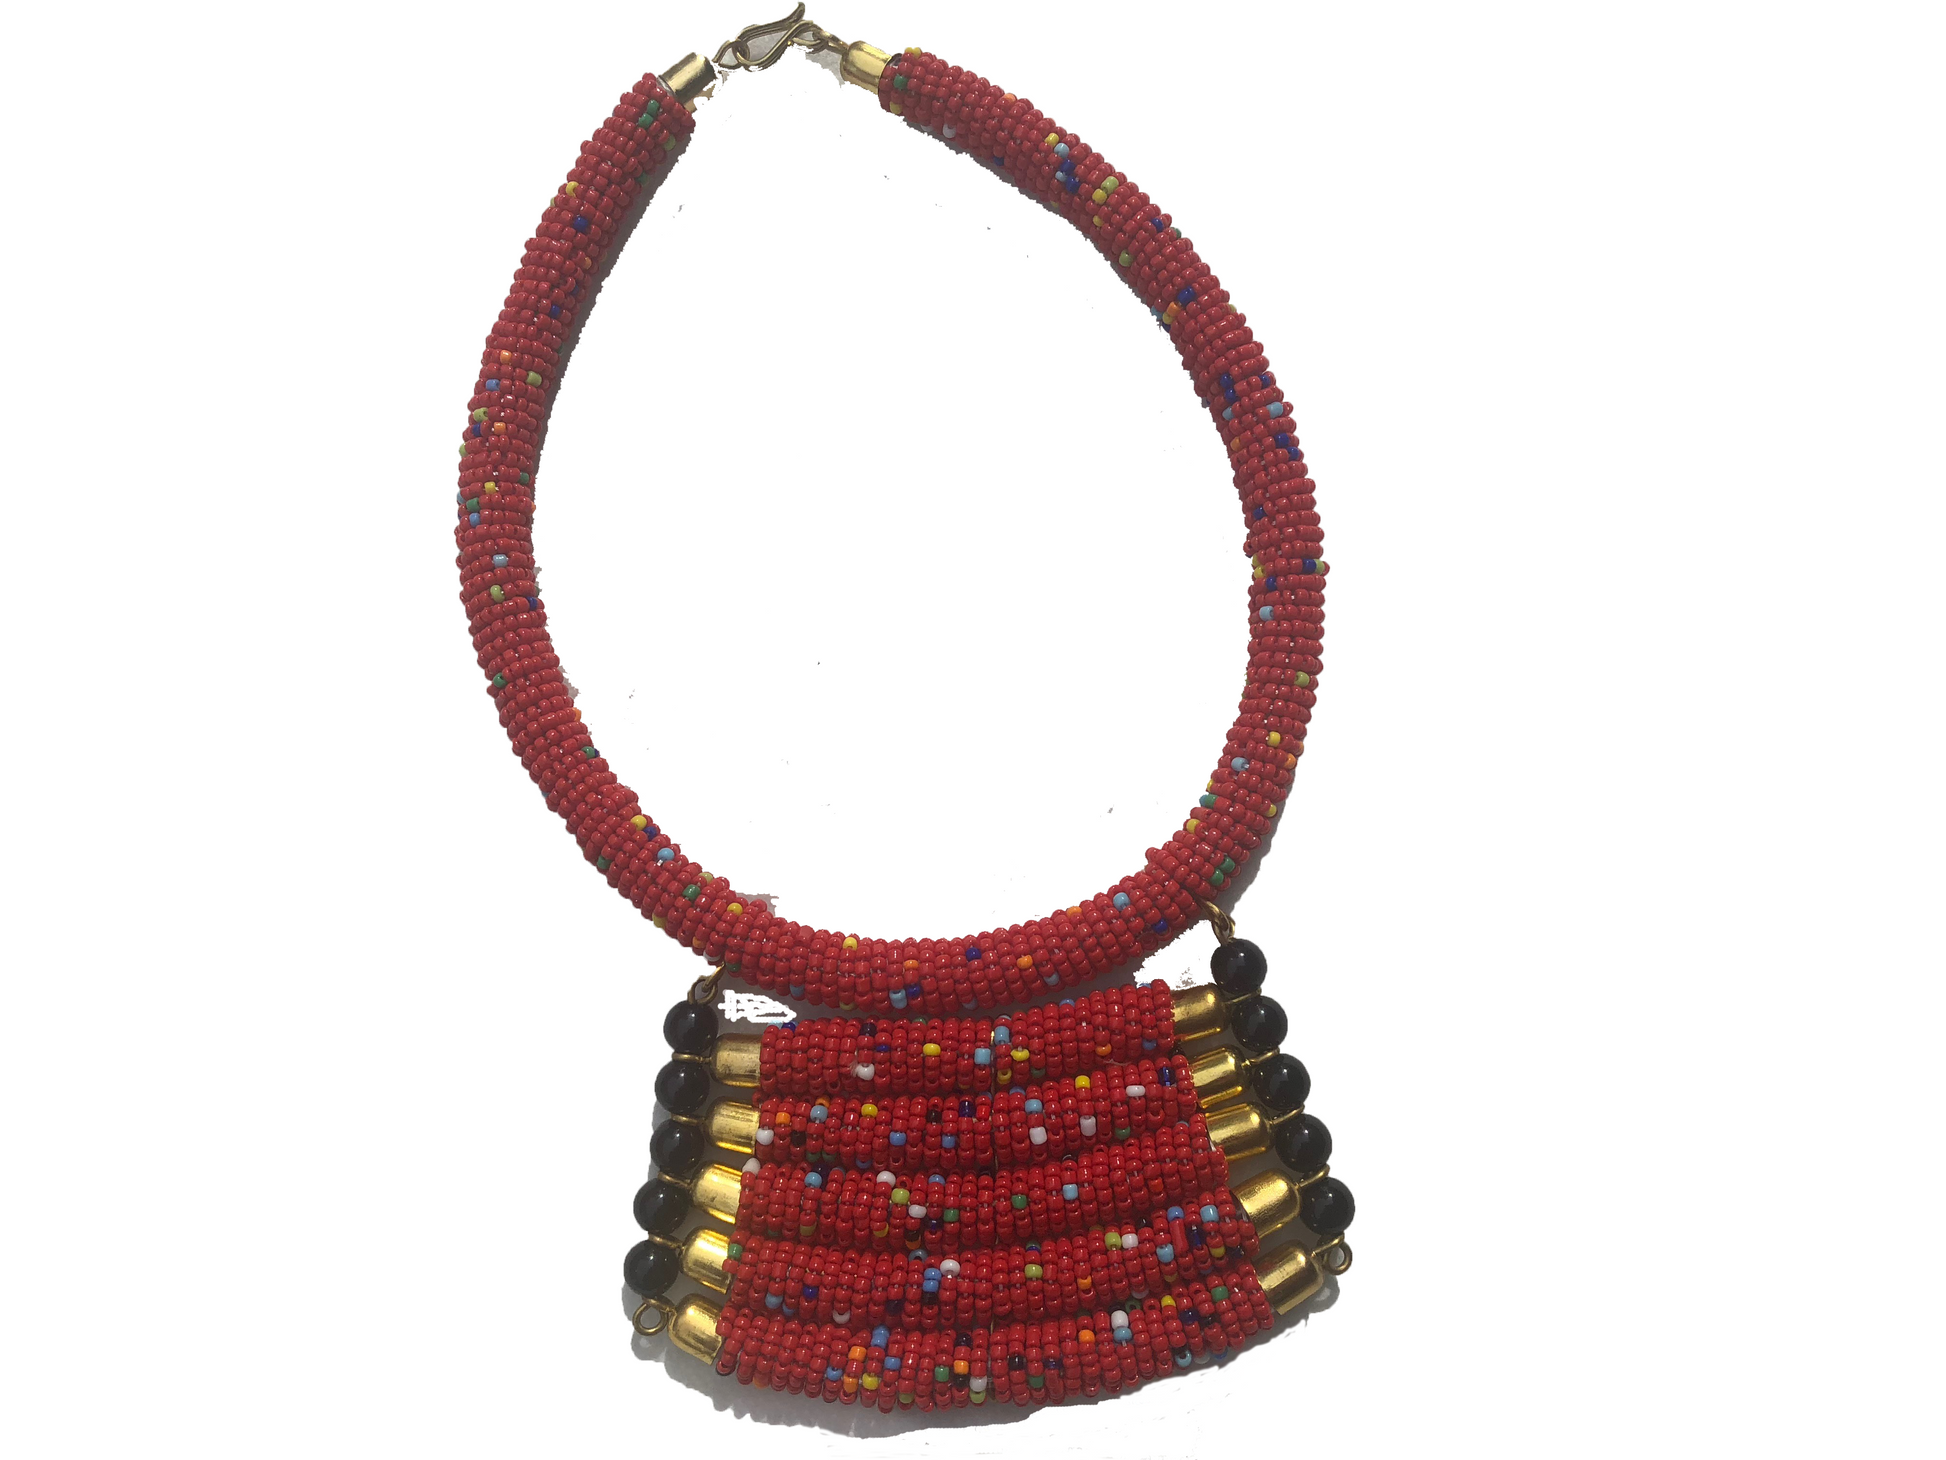 Red choker necklace